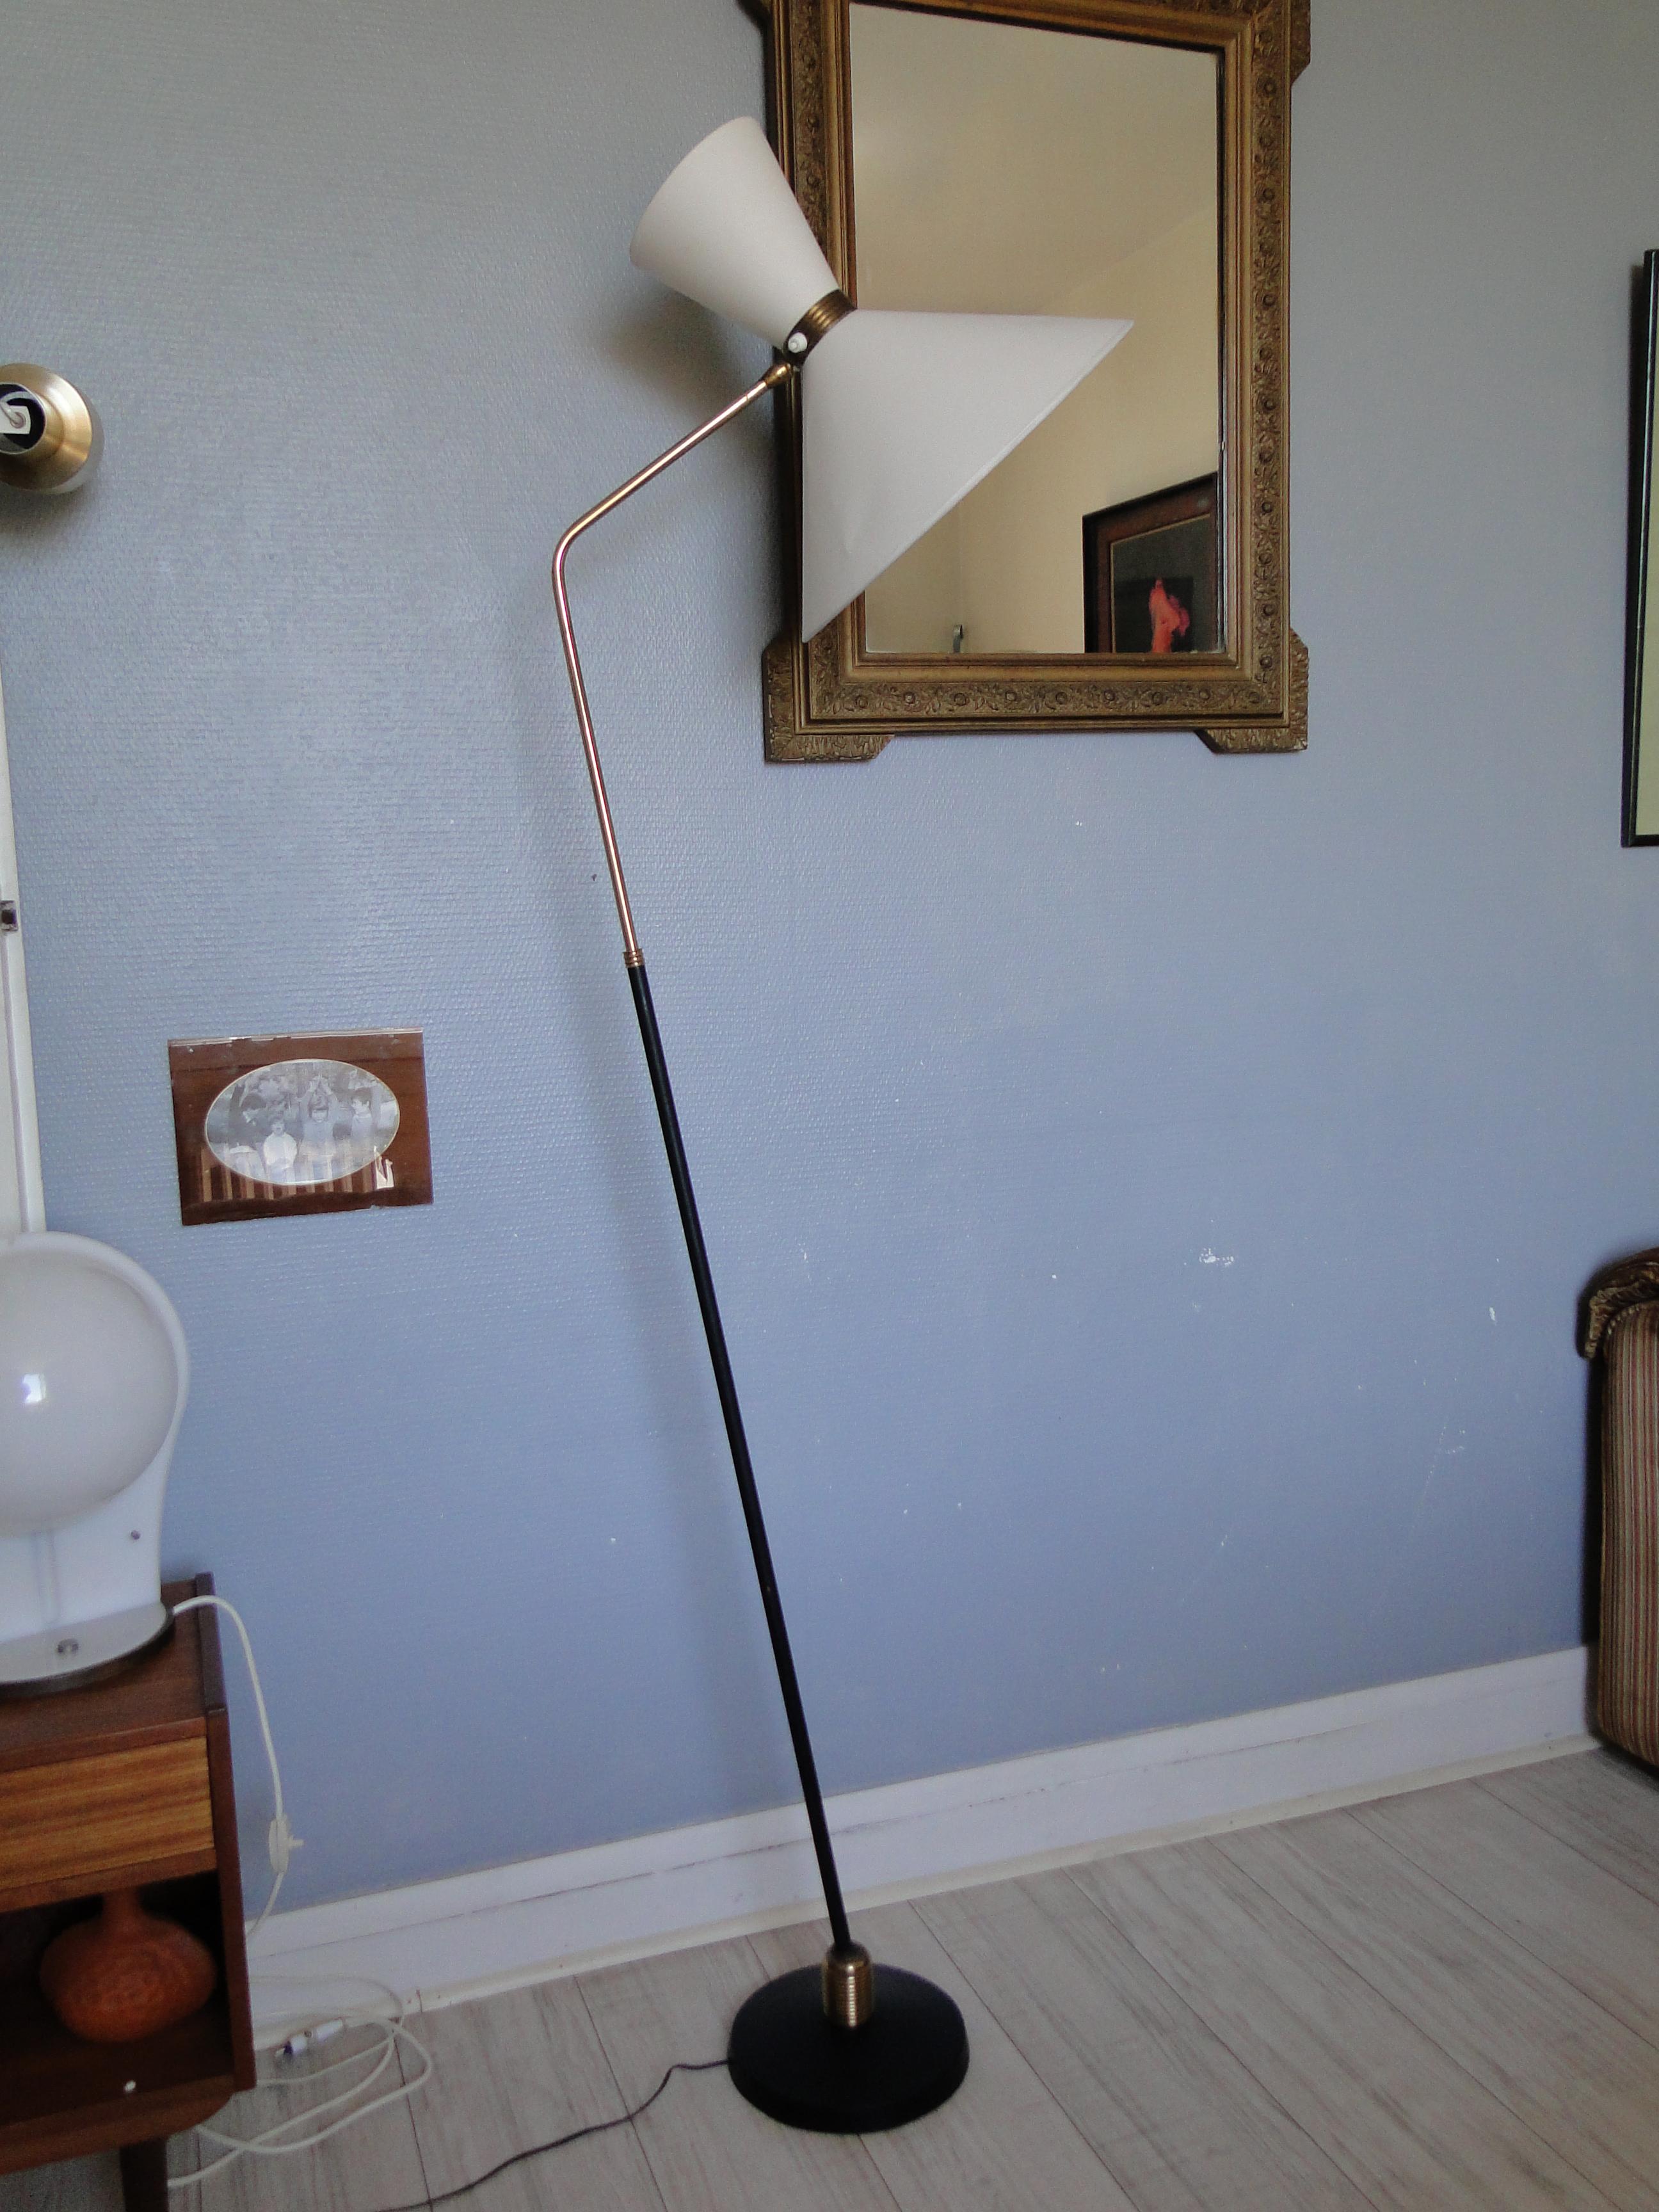 Fine French 1950s Adjustable Floor Lamp by Lunel France Rene Mathieu Arlus 1